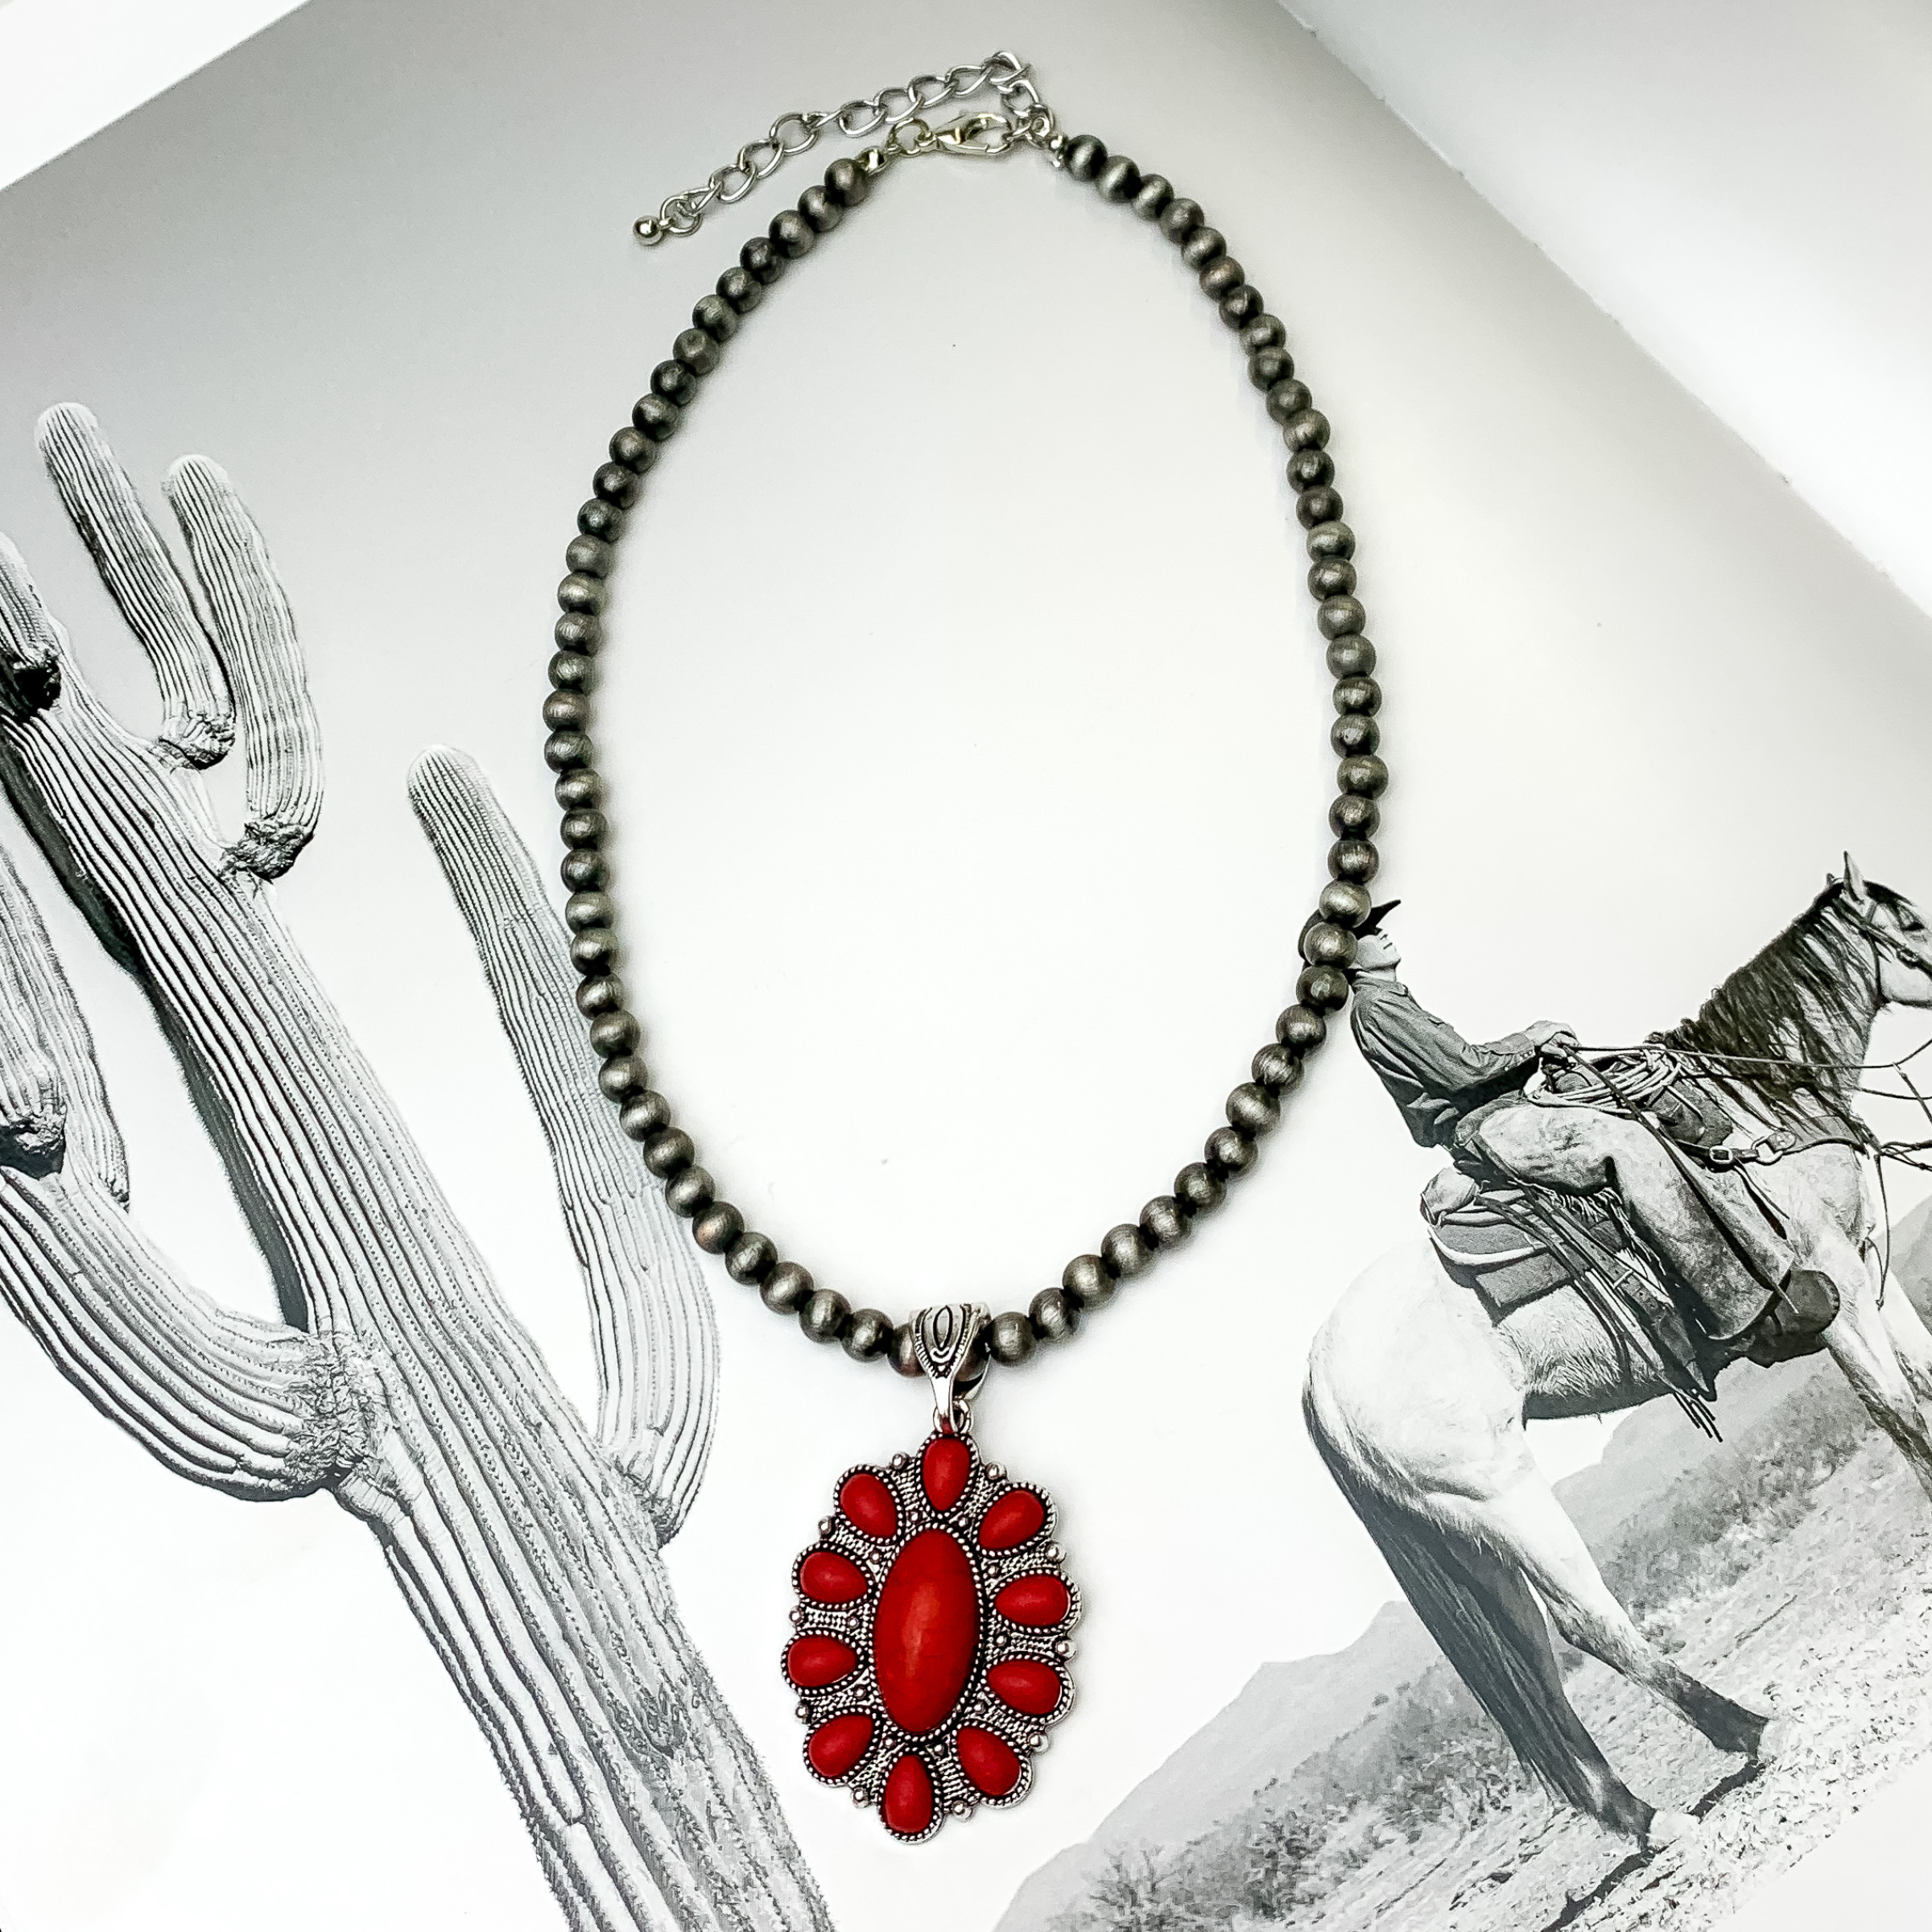 Silver beaded necklace with an oval pendant. This pendant is silver with a red stone design. This necklace is pictured on a black and white picture. 